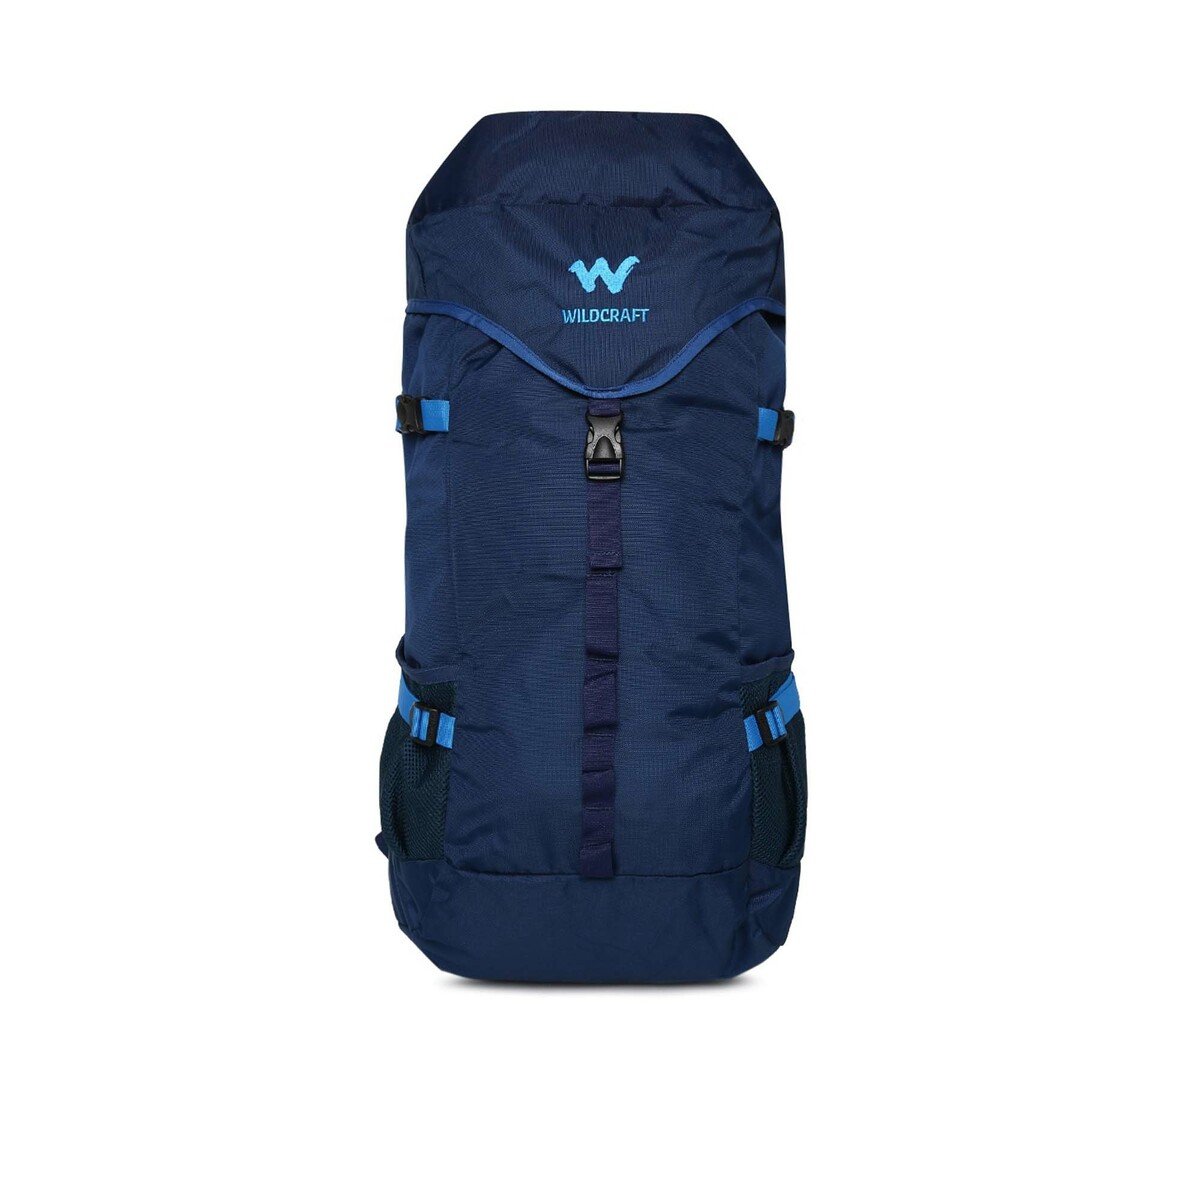 Wildcraft Campaign Backpack Travellersack1 Navy Blue WCT87127